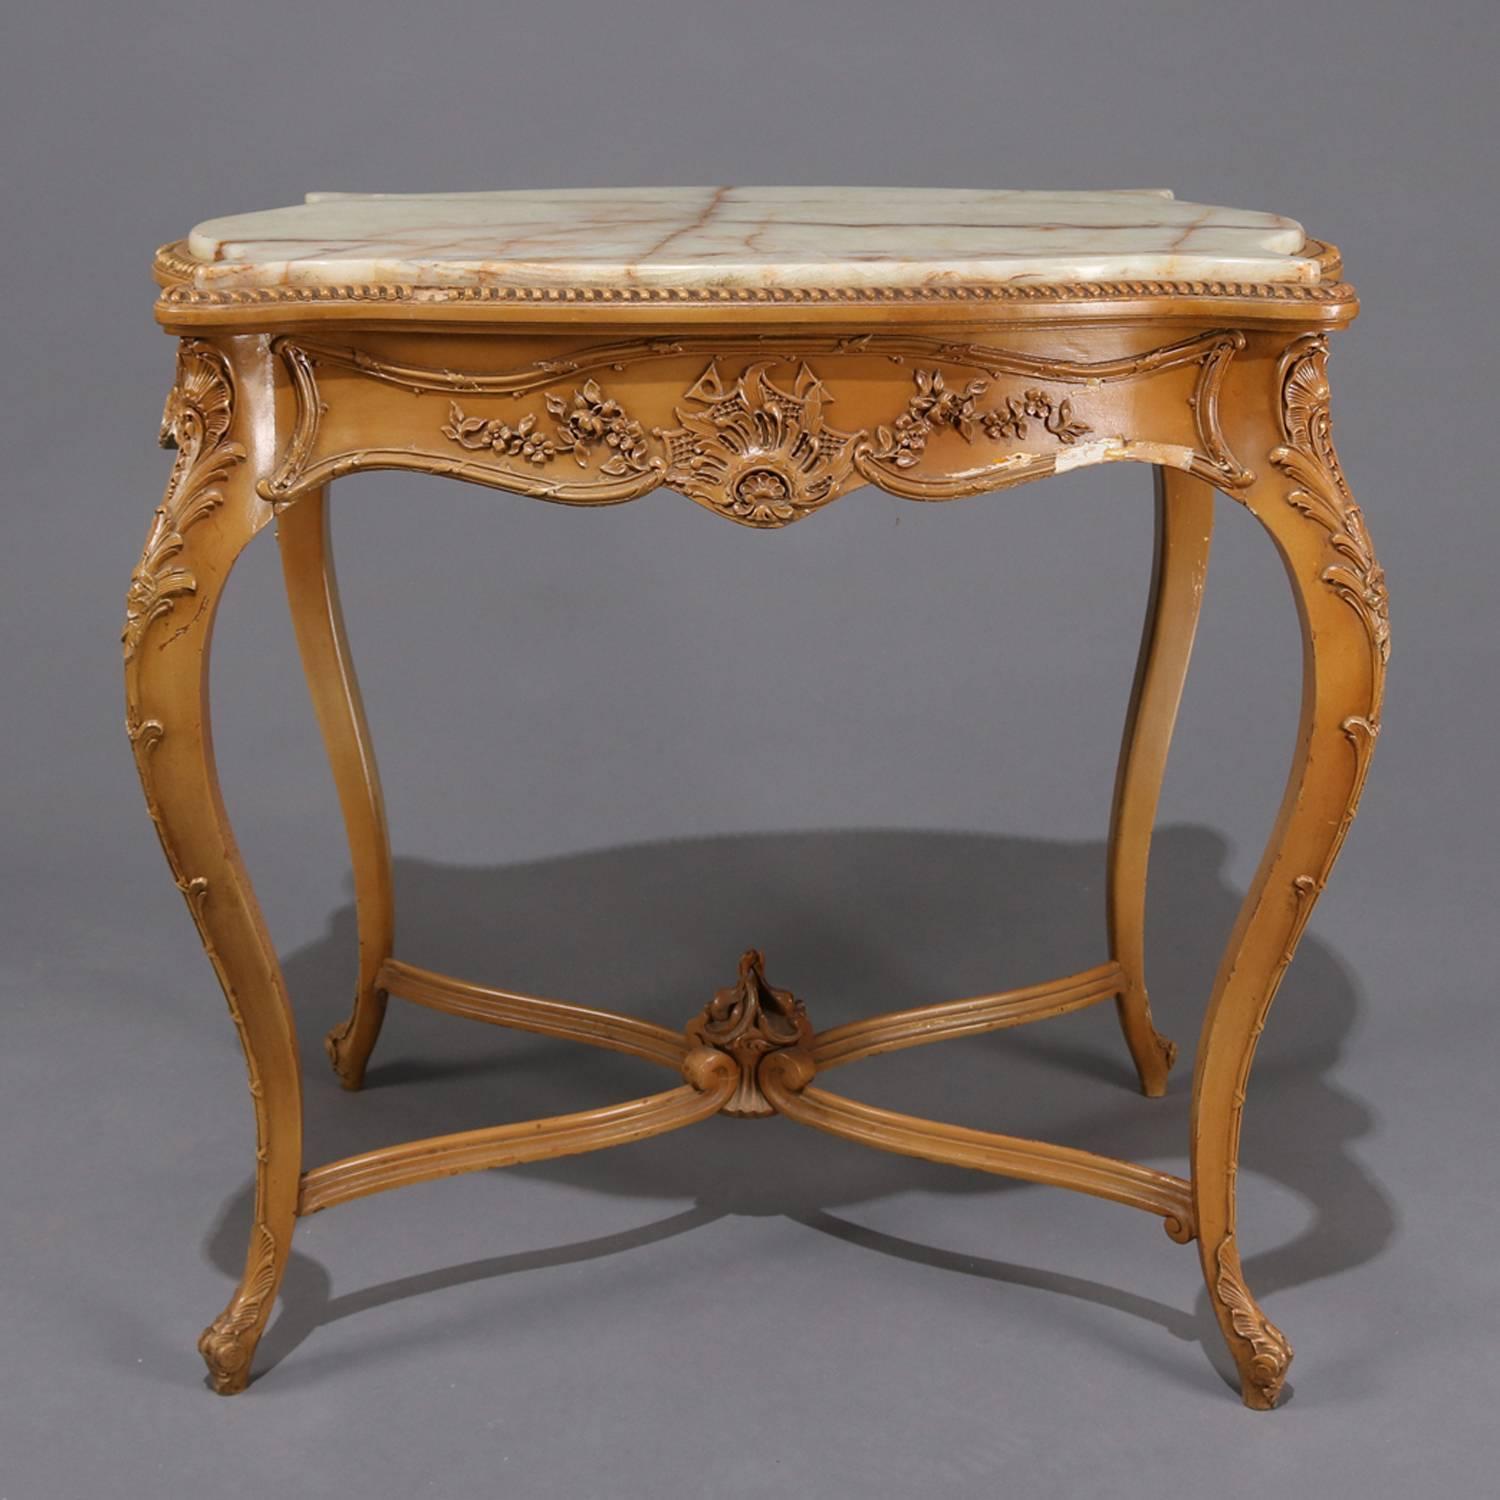 Antique French Louis XIV painted giltwood table features carved foliate and floral decoration with a shaped top having an onyx inset, seated on cabriole legs with X-stretcher with scroll and flame form central finial, circa 1890

Measures: 29.5